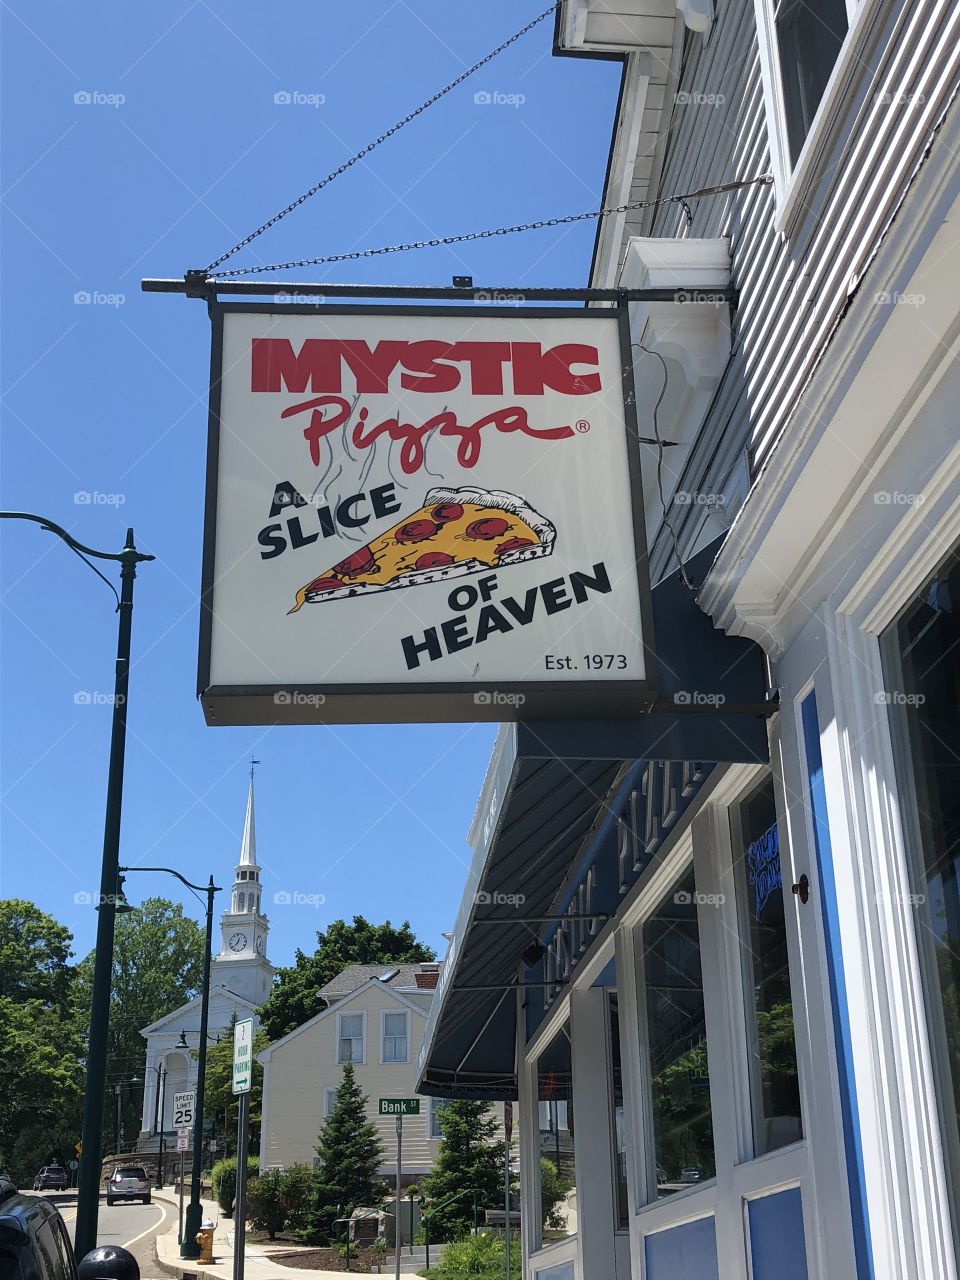 Mystic Pizza sign (as in the film) in Mystic, CT